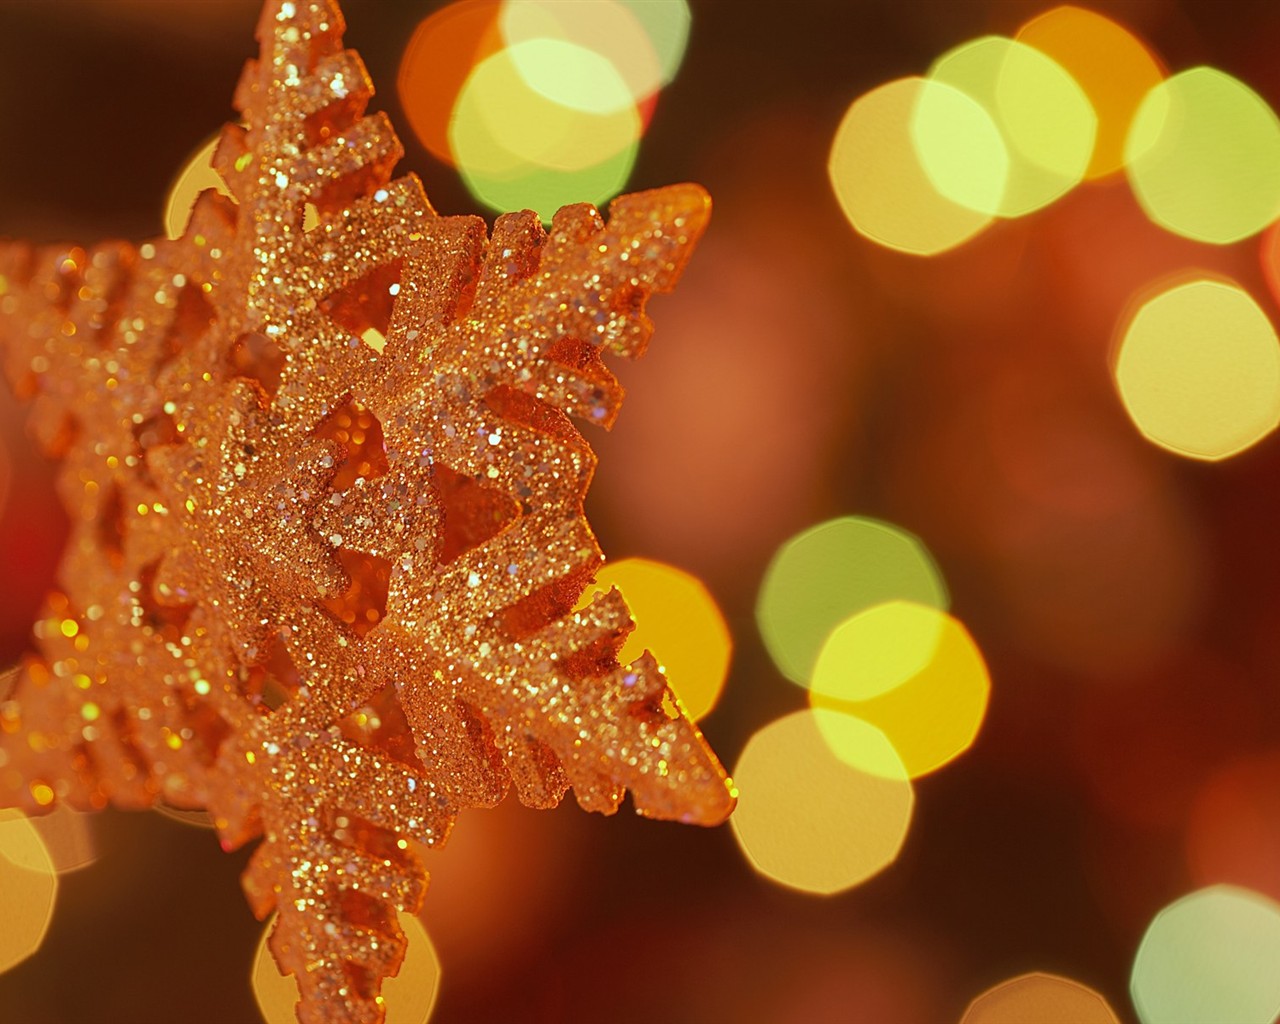 Happy Christmas decorations wallpapers #1 - 1280x1024